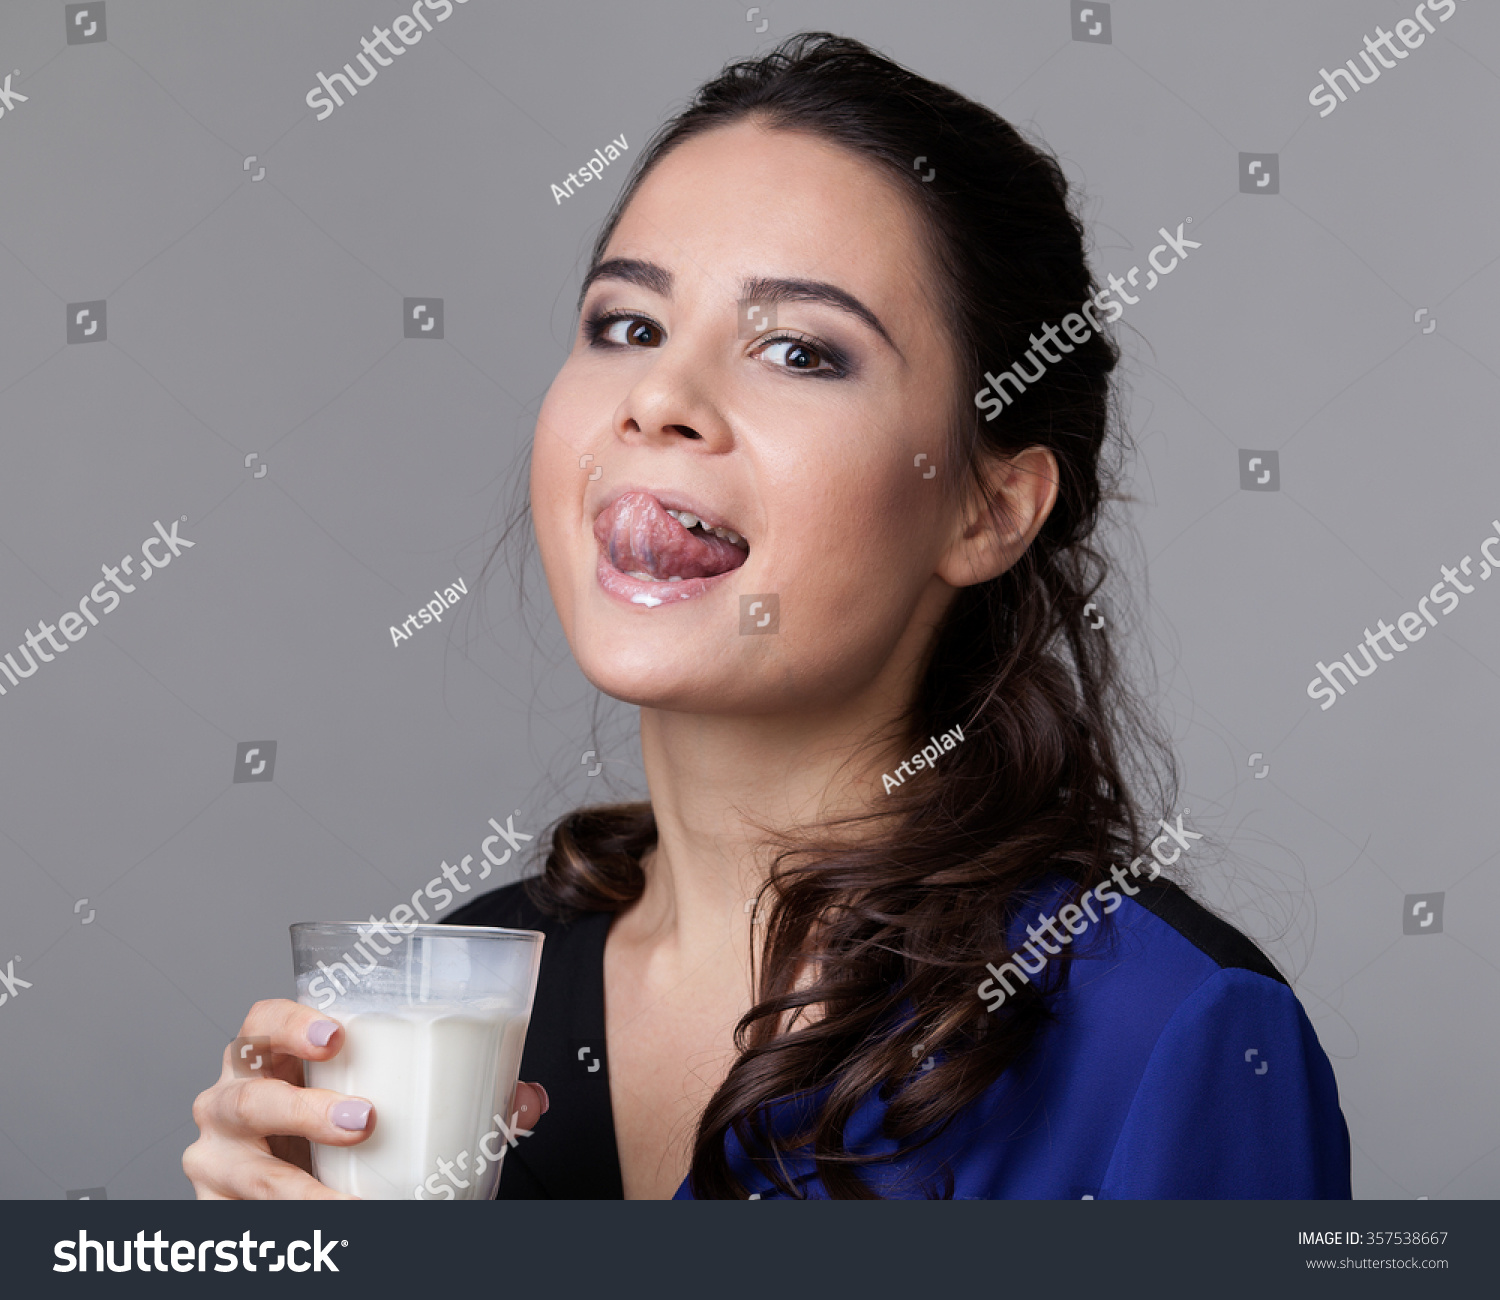 Young Brunette In A Black And Blue Shirt Licking Milk From A Goblet